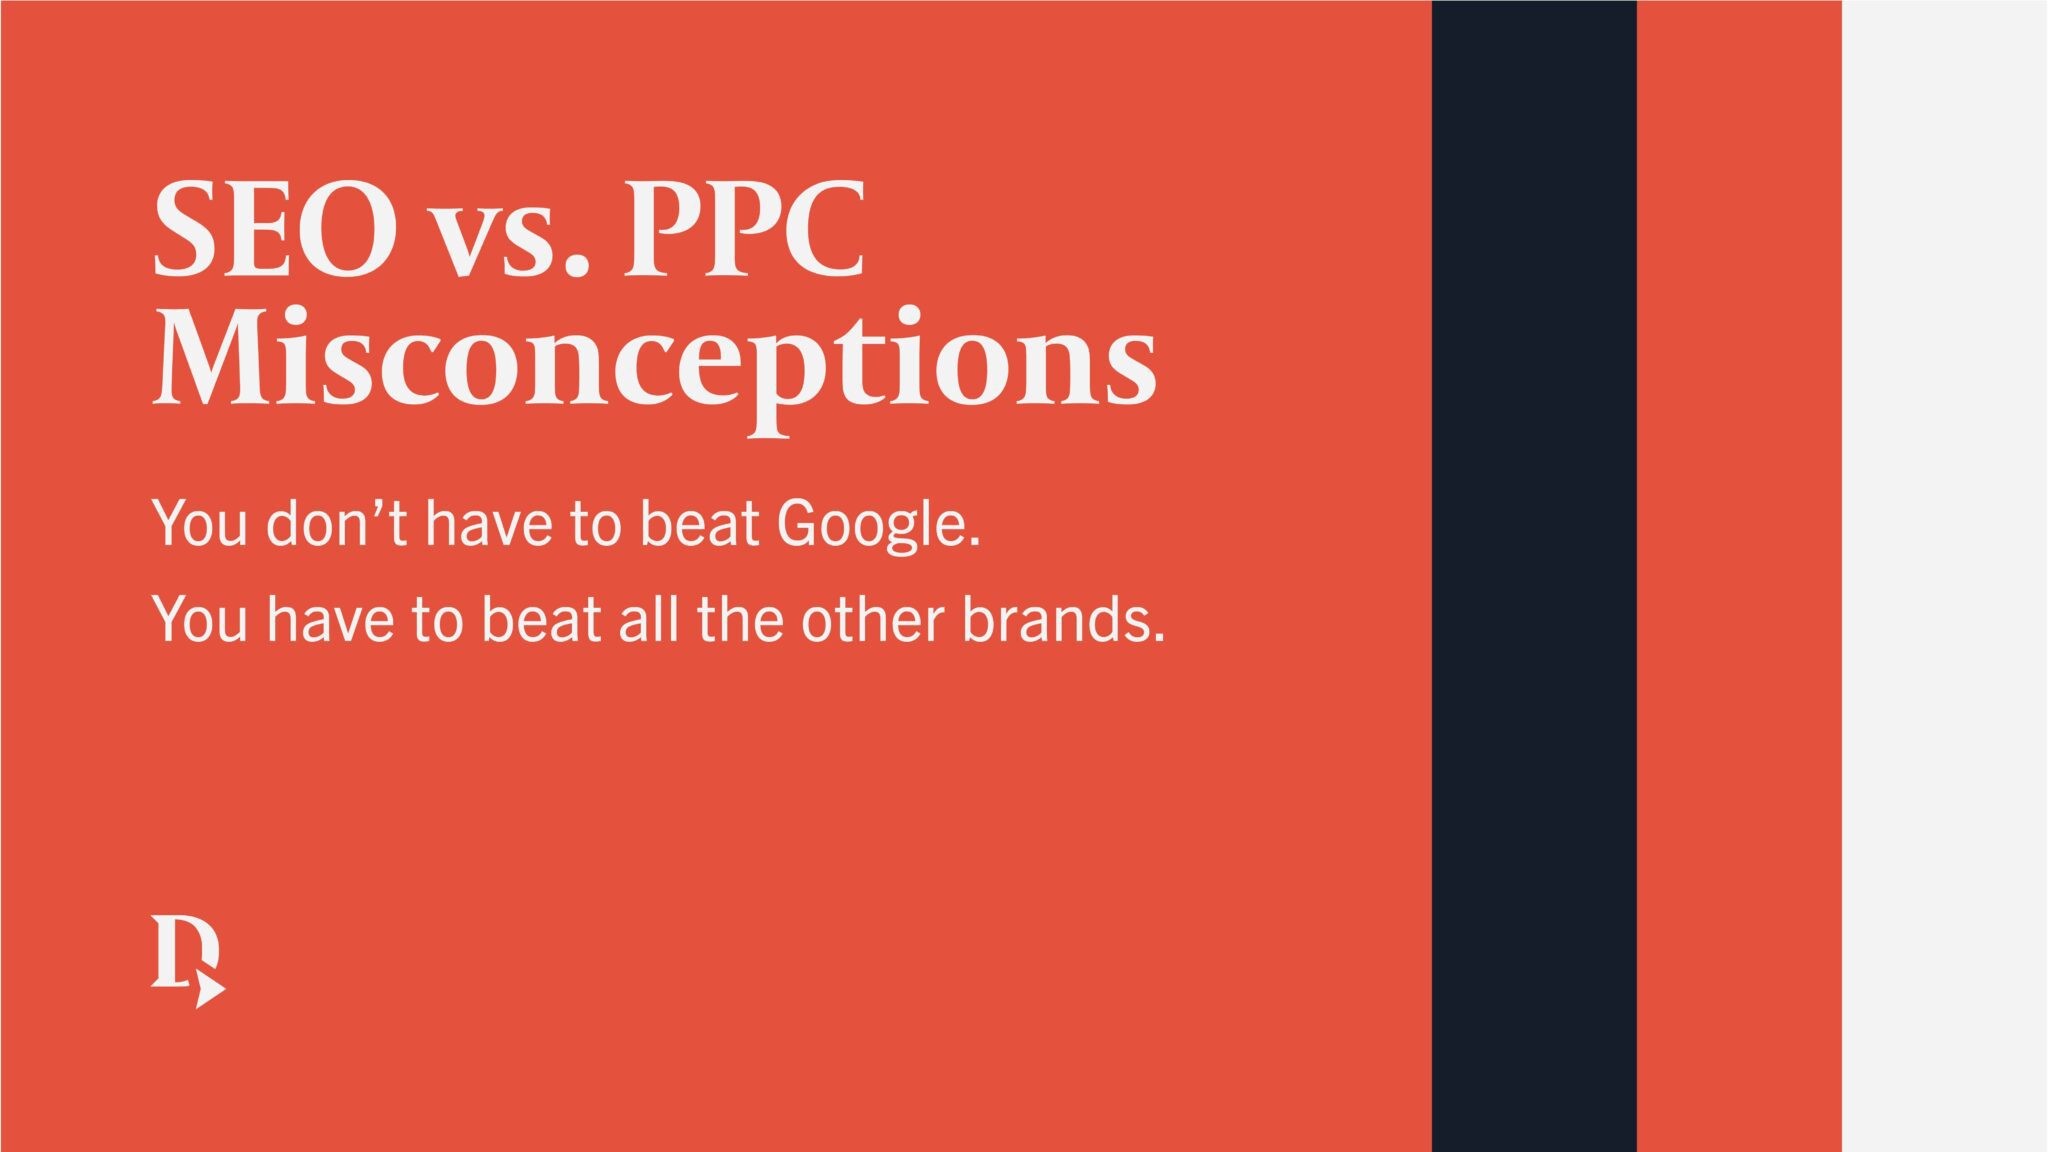 SEO vs. PPC misconception about beating Google. 